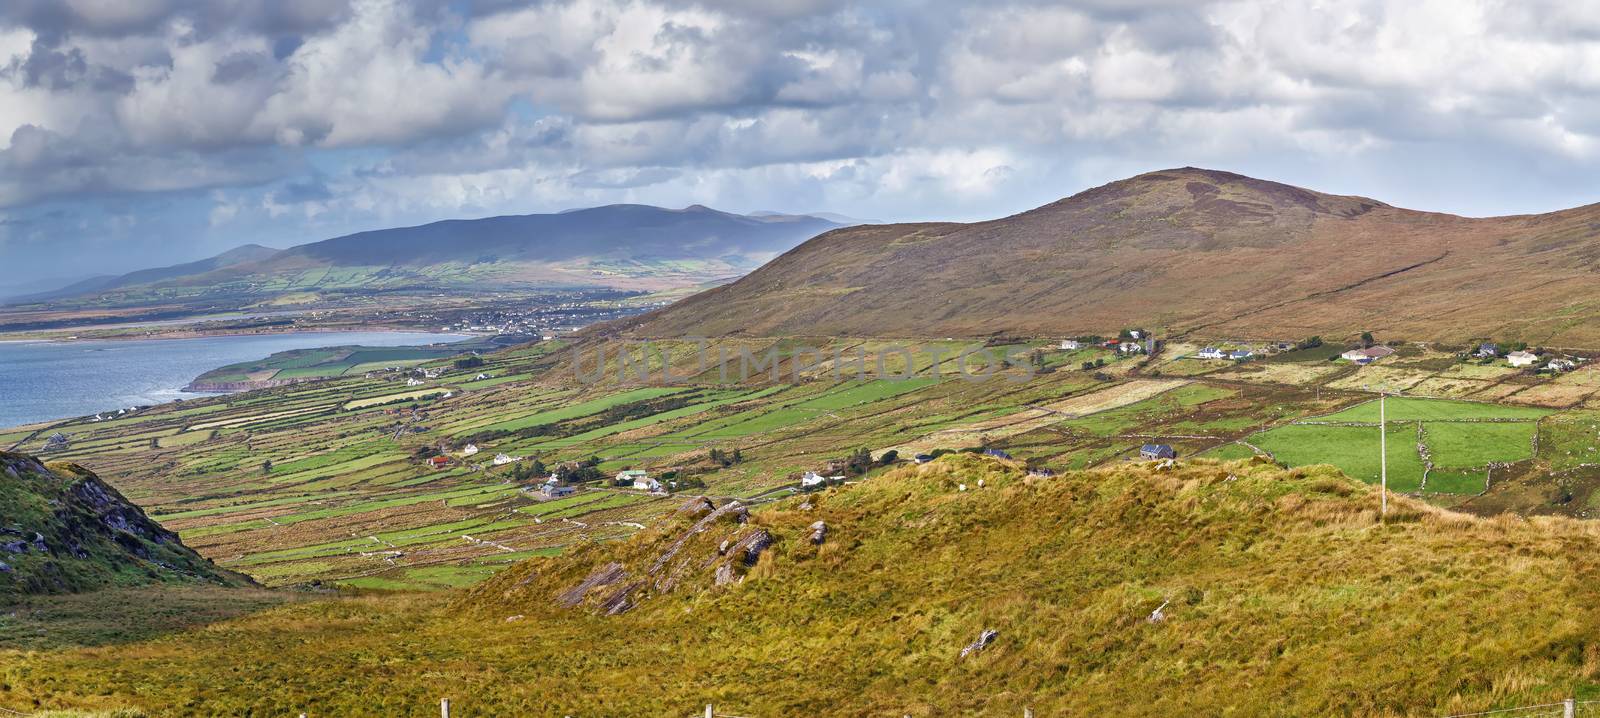 Landscape from Ring of Kerry, Ireland by borisb17